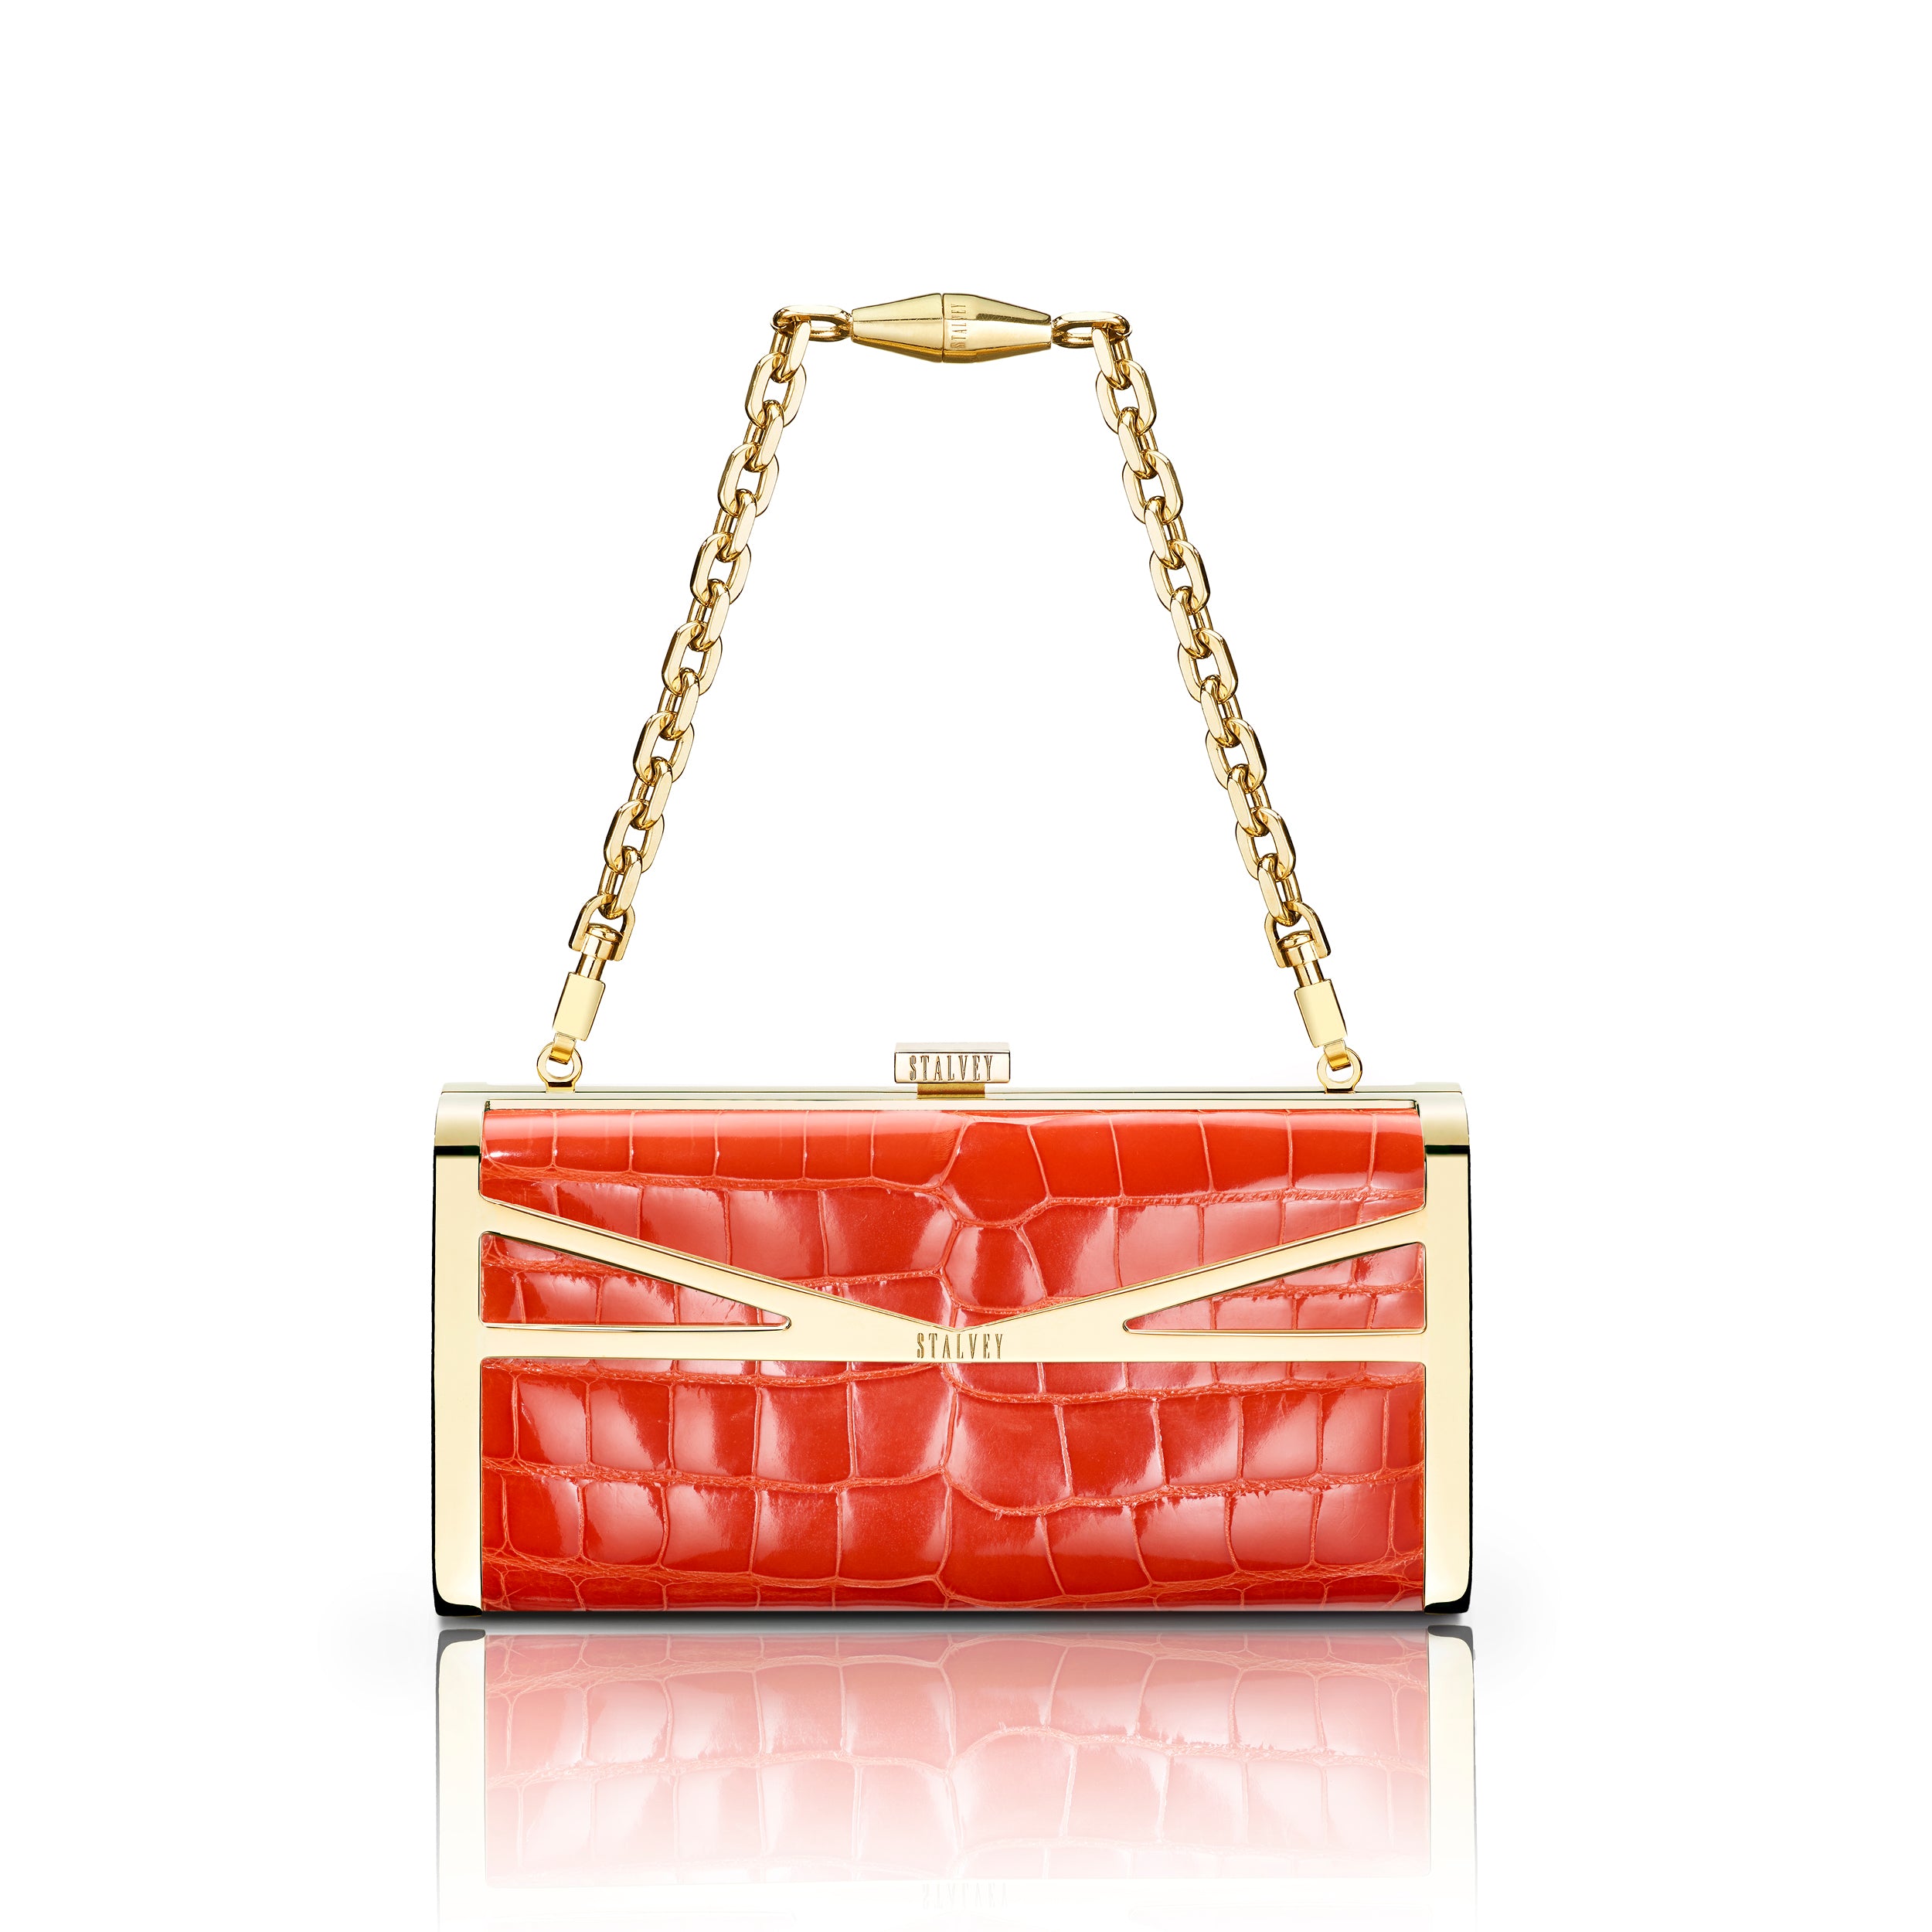 STALVEY Square Clutch in Orange Alligator with 24kt Gold Hardware Front View with Chain